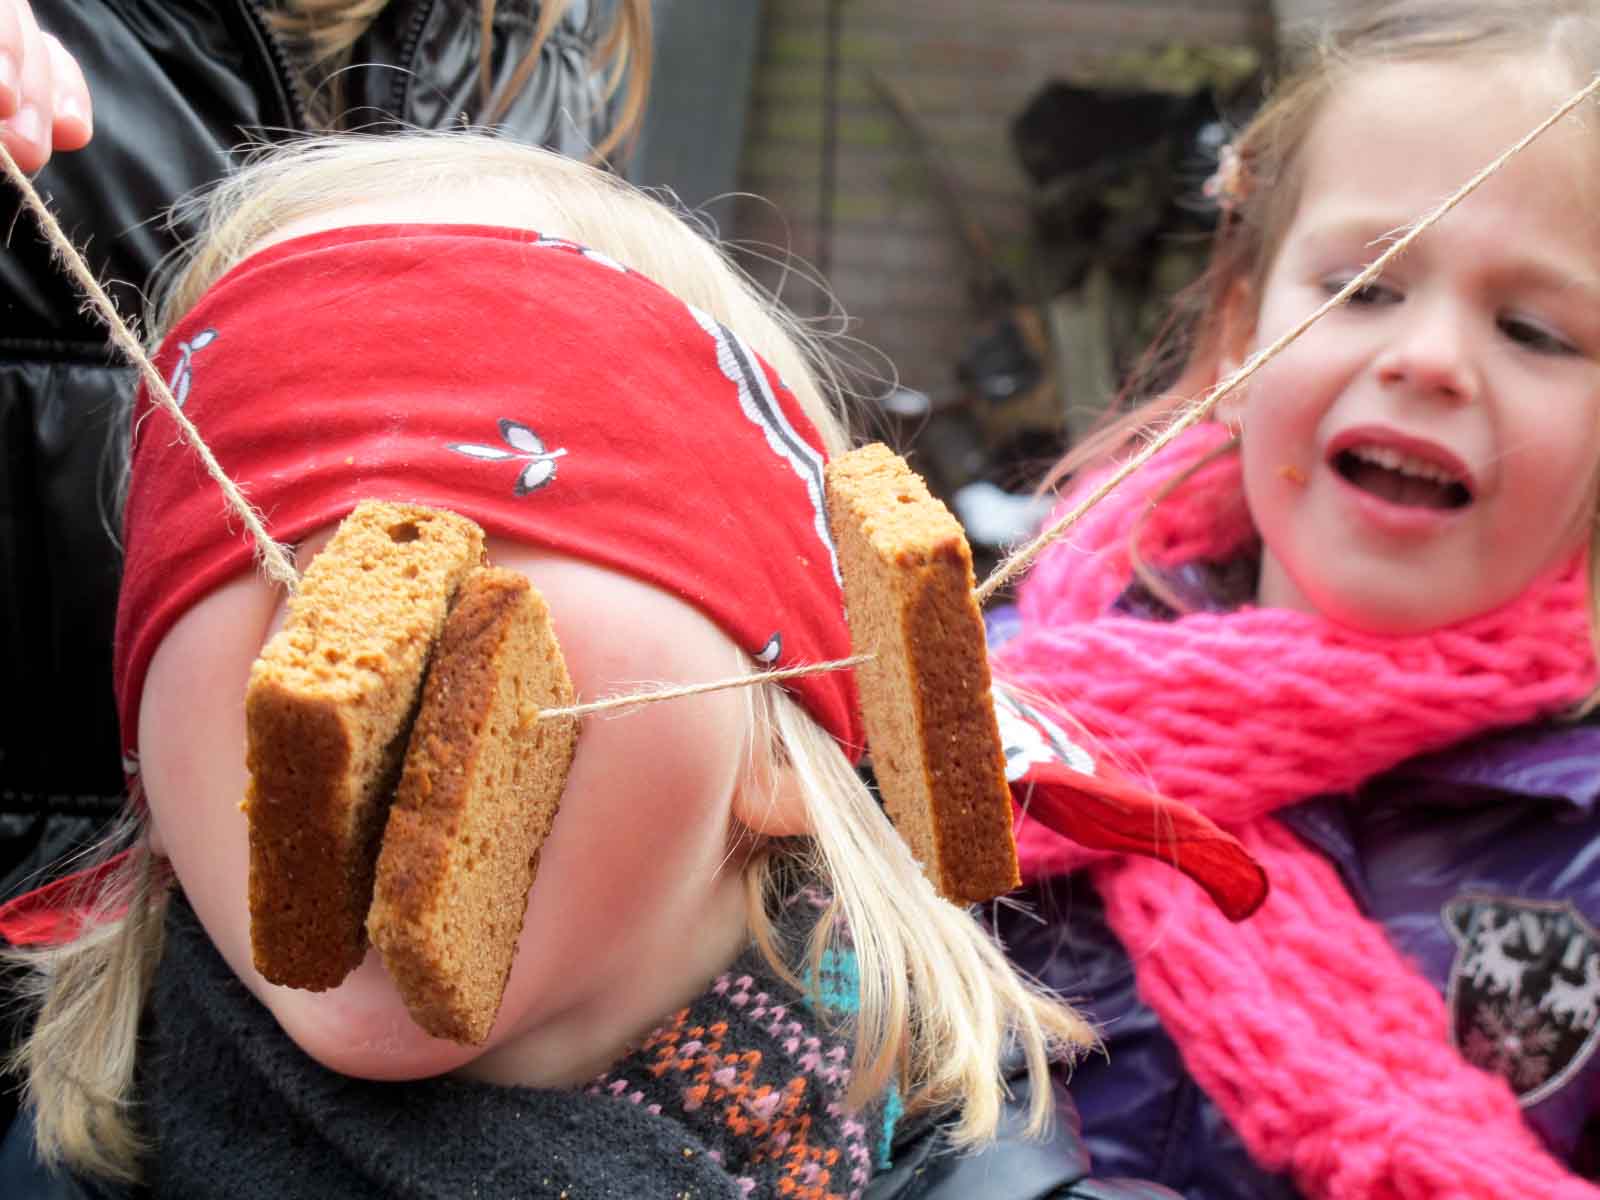 A child participating in koekhappen.